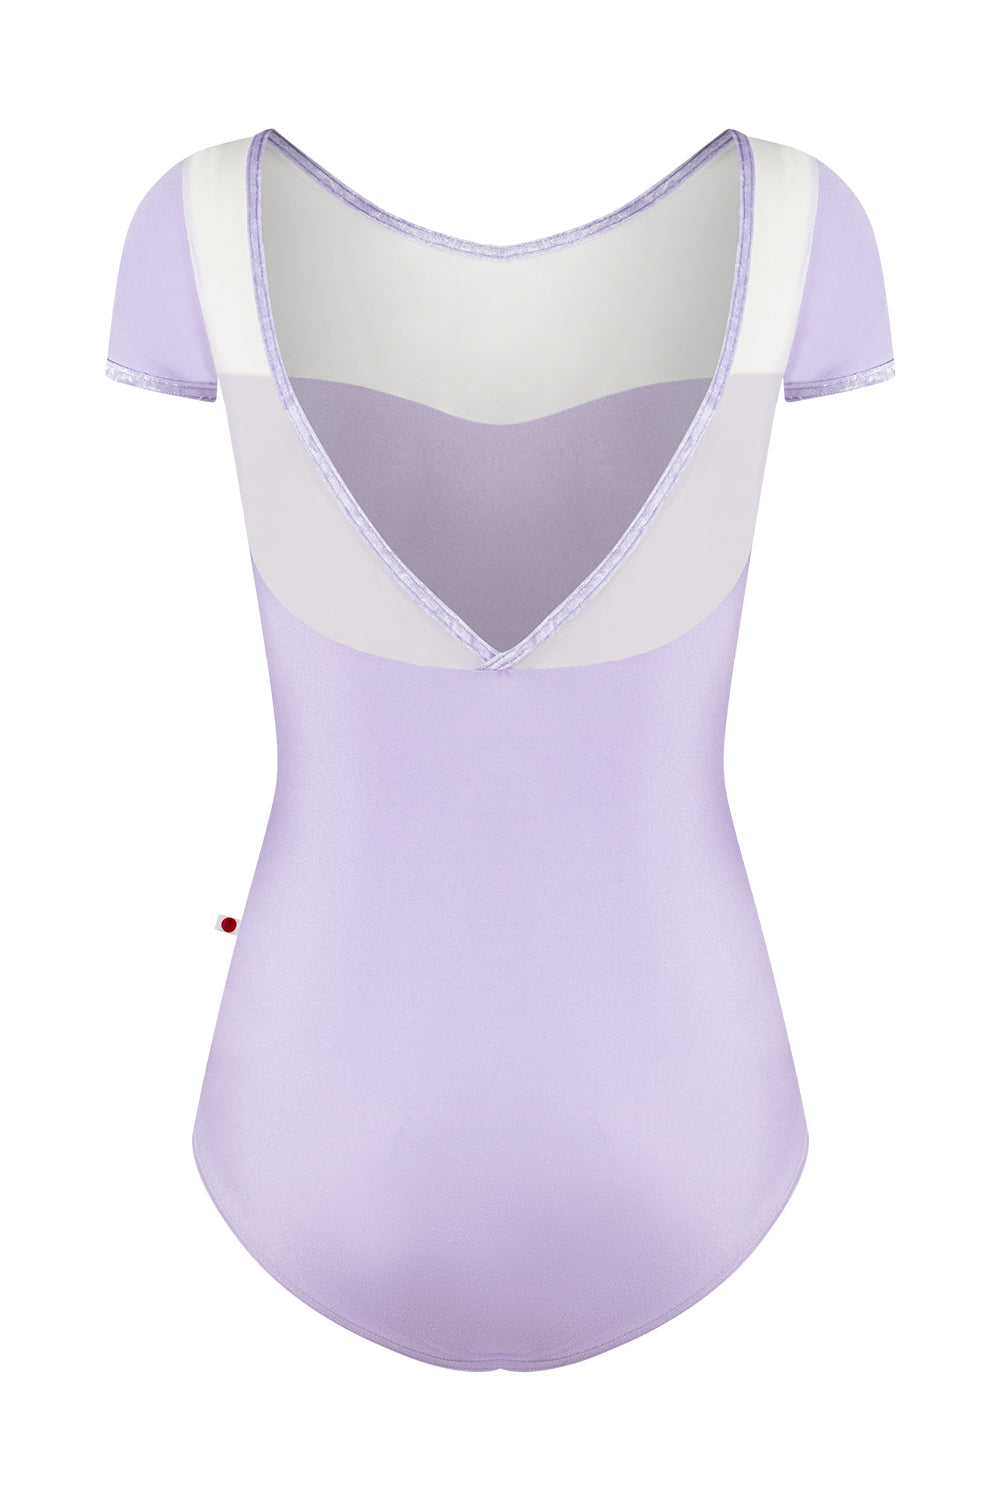 Jane leotard in N-Poem body color with Mesh White top color and CV-Angelic trim color